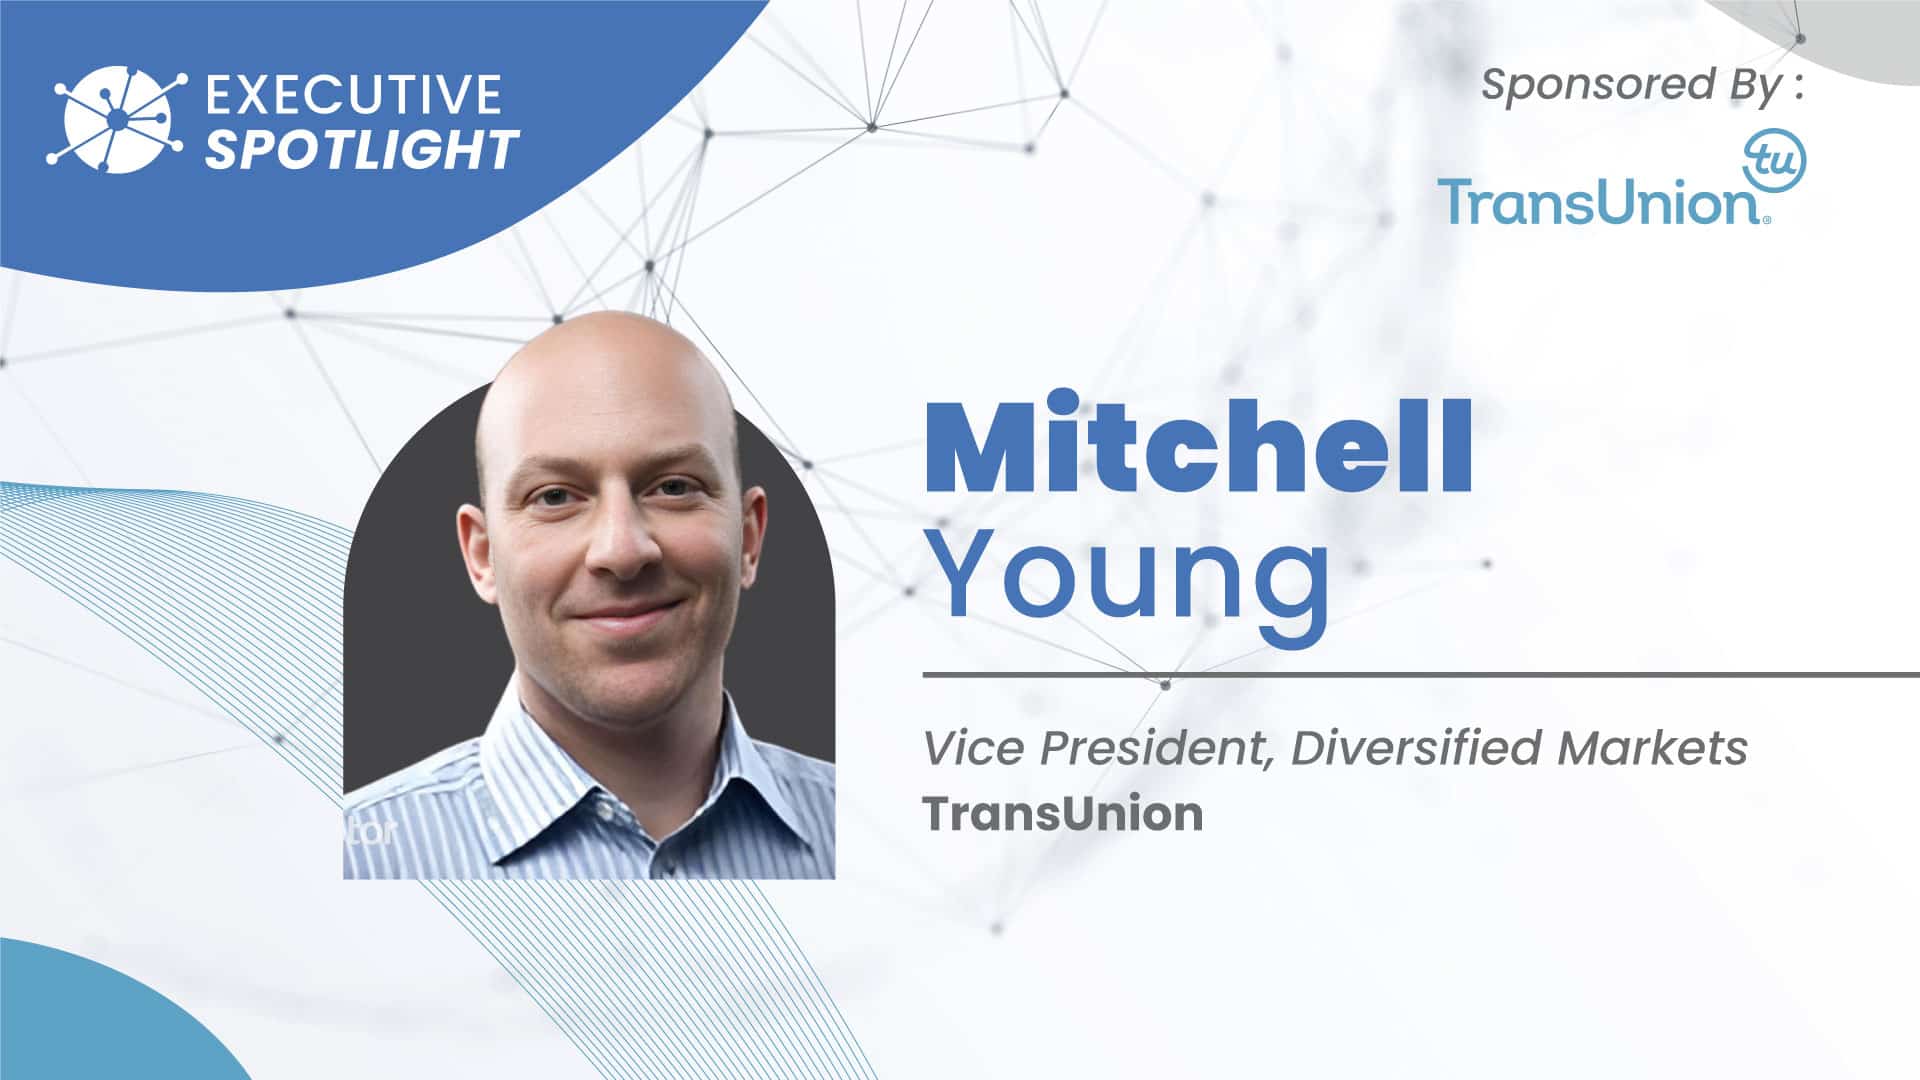 Executive Spotlight with Mitchell Young